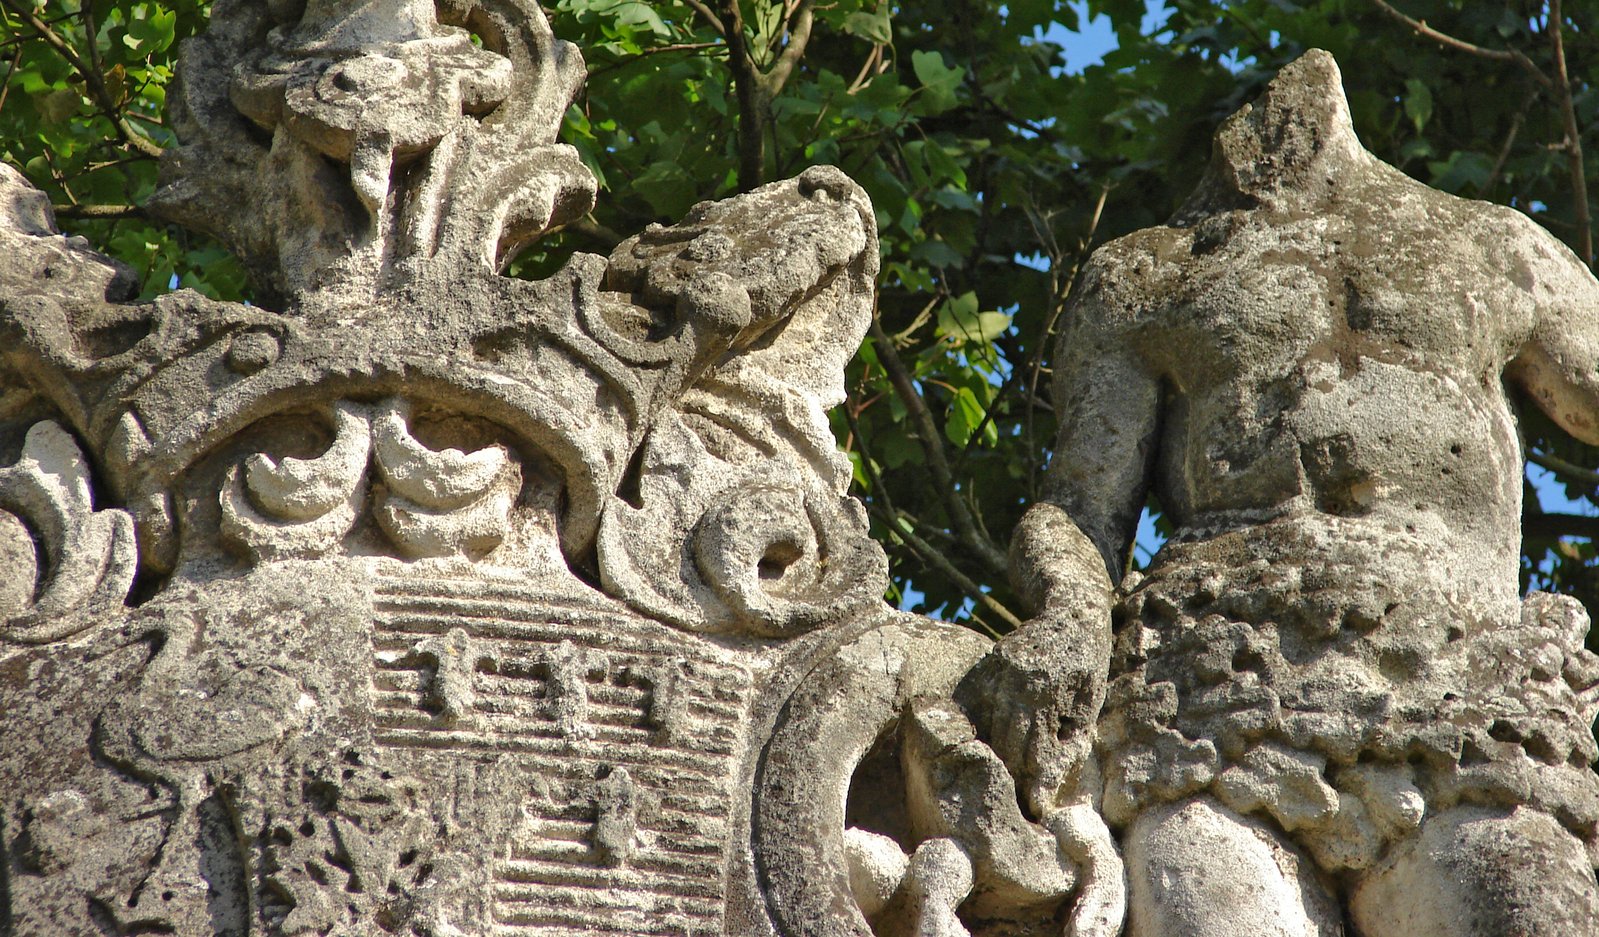 stone sculptures have ornate designs and leaves